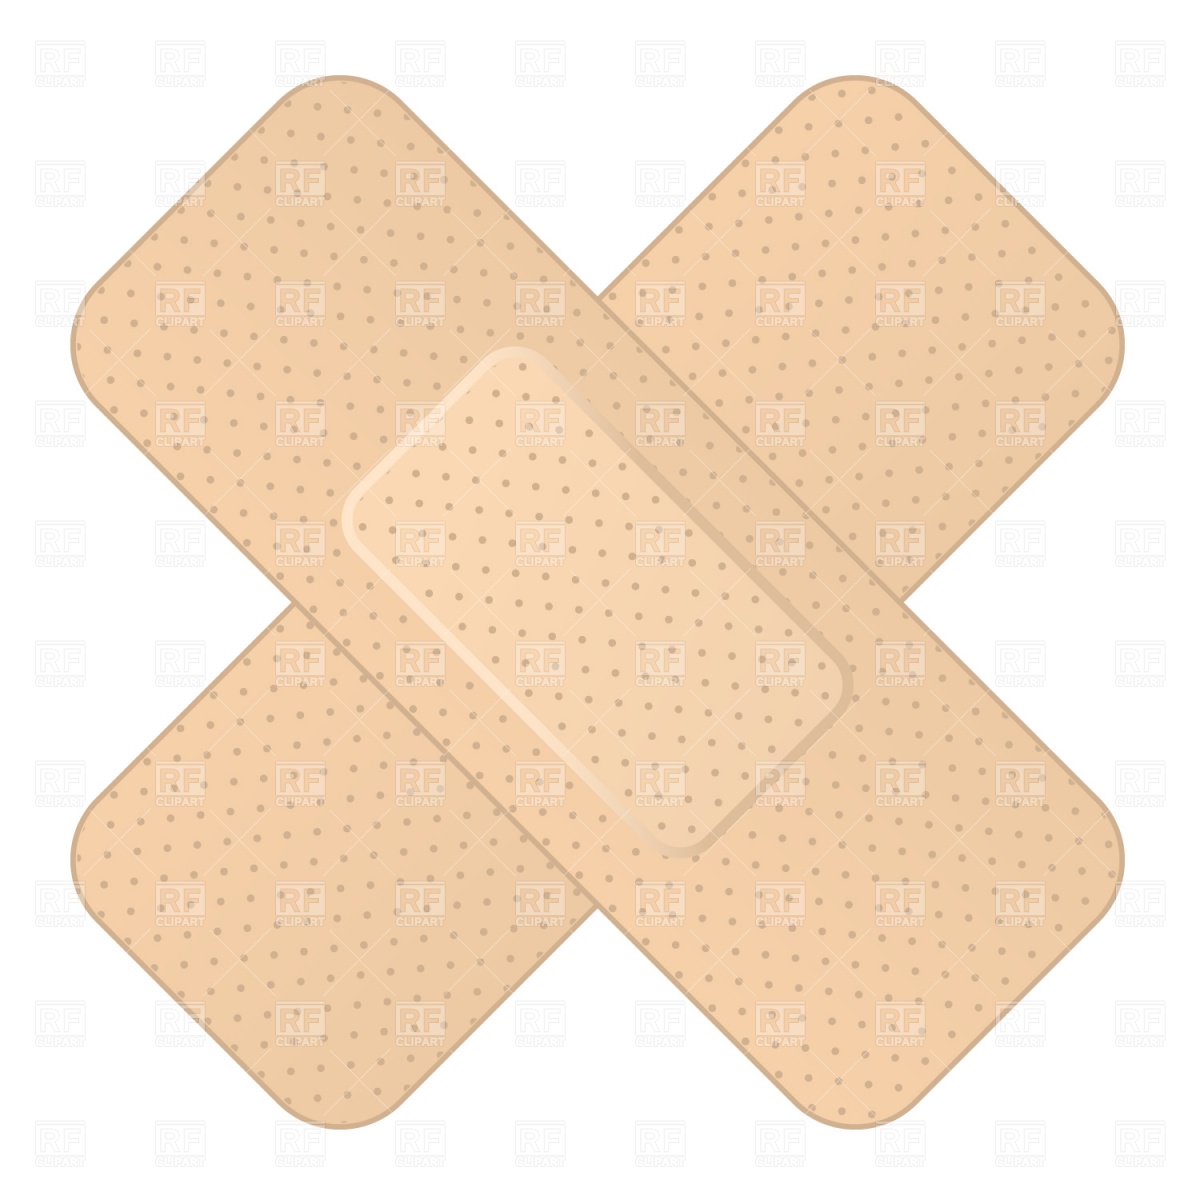 Crossed Bandage Download Royalty Free Vector Clipart  Eps 